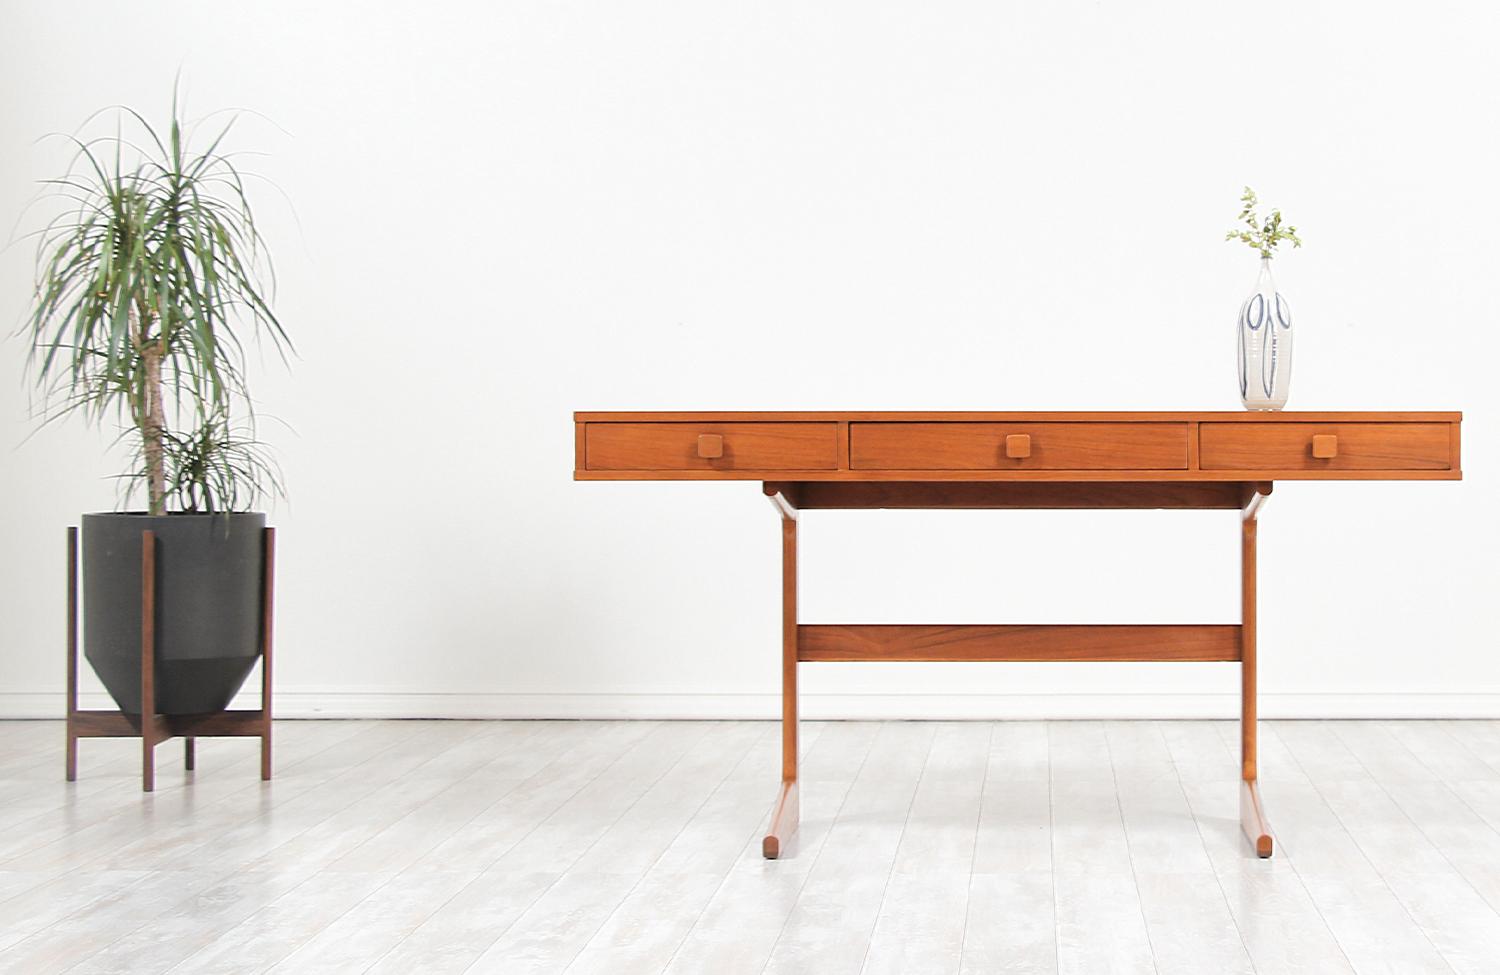 Elegant cantilever desk designed by Georg Petersens for Georg Petersens Møbelfabrik in Denmark, circa 1960s. This unique design features a sturdy desk top that is complemented by three drawers with sculpted squared pulls. The desk appears to be